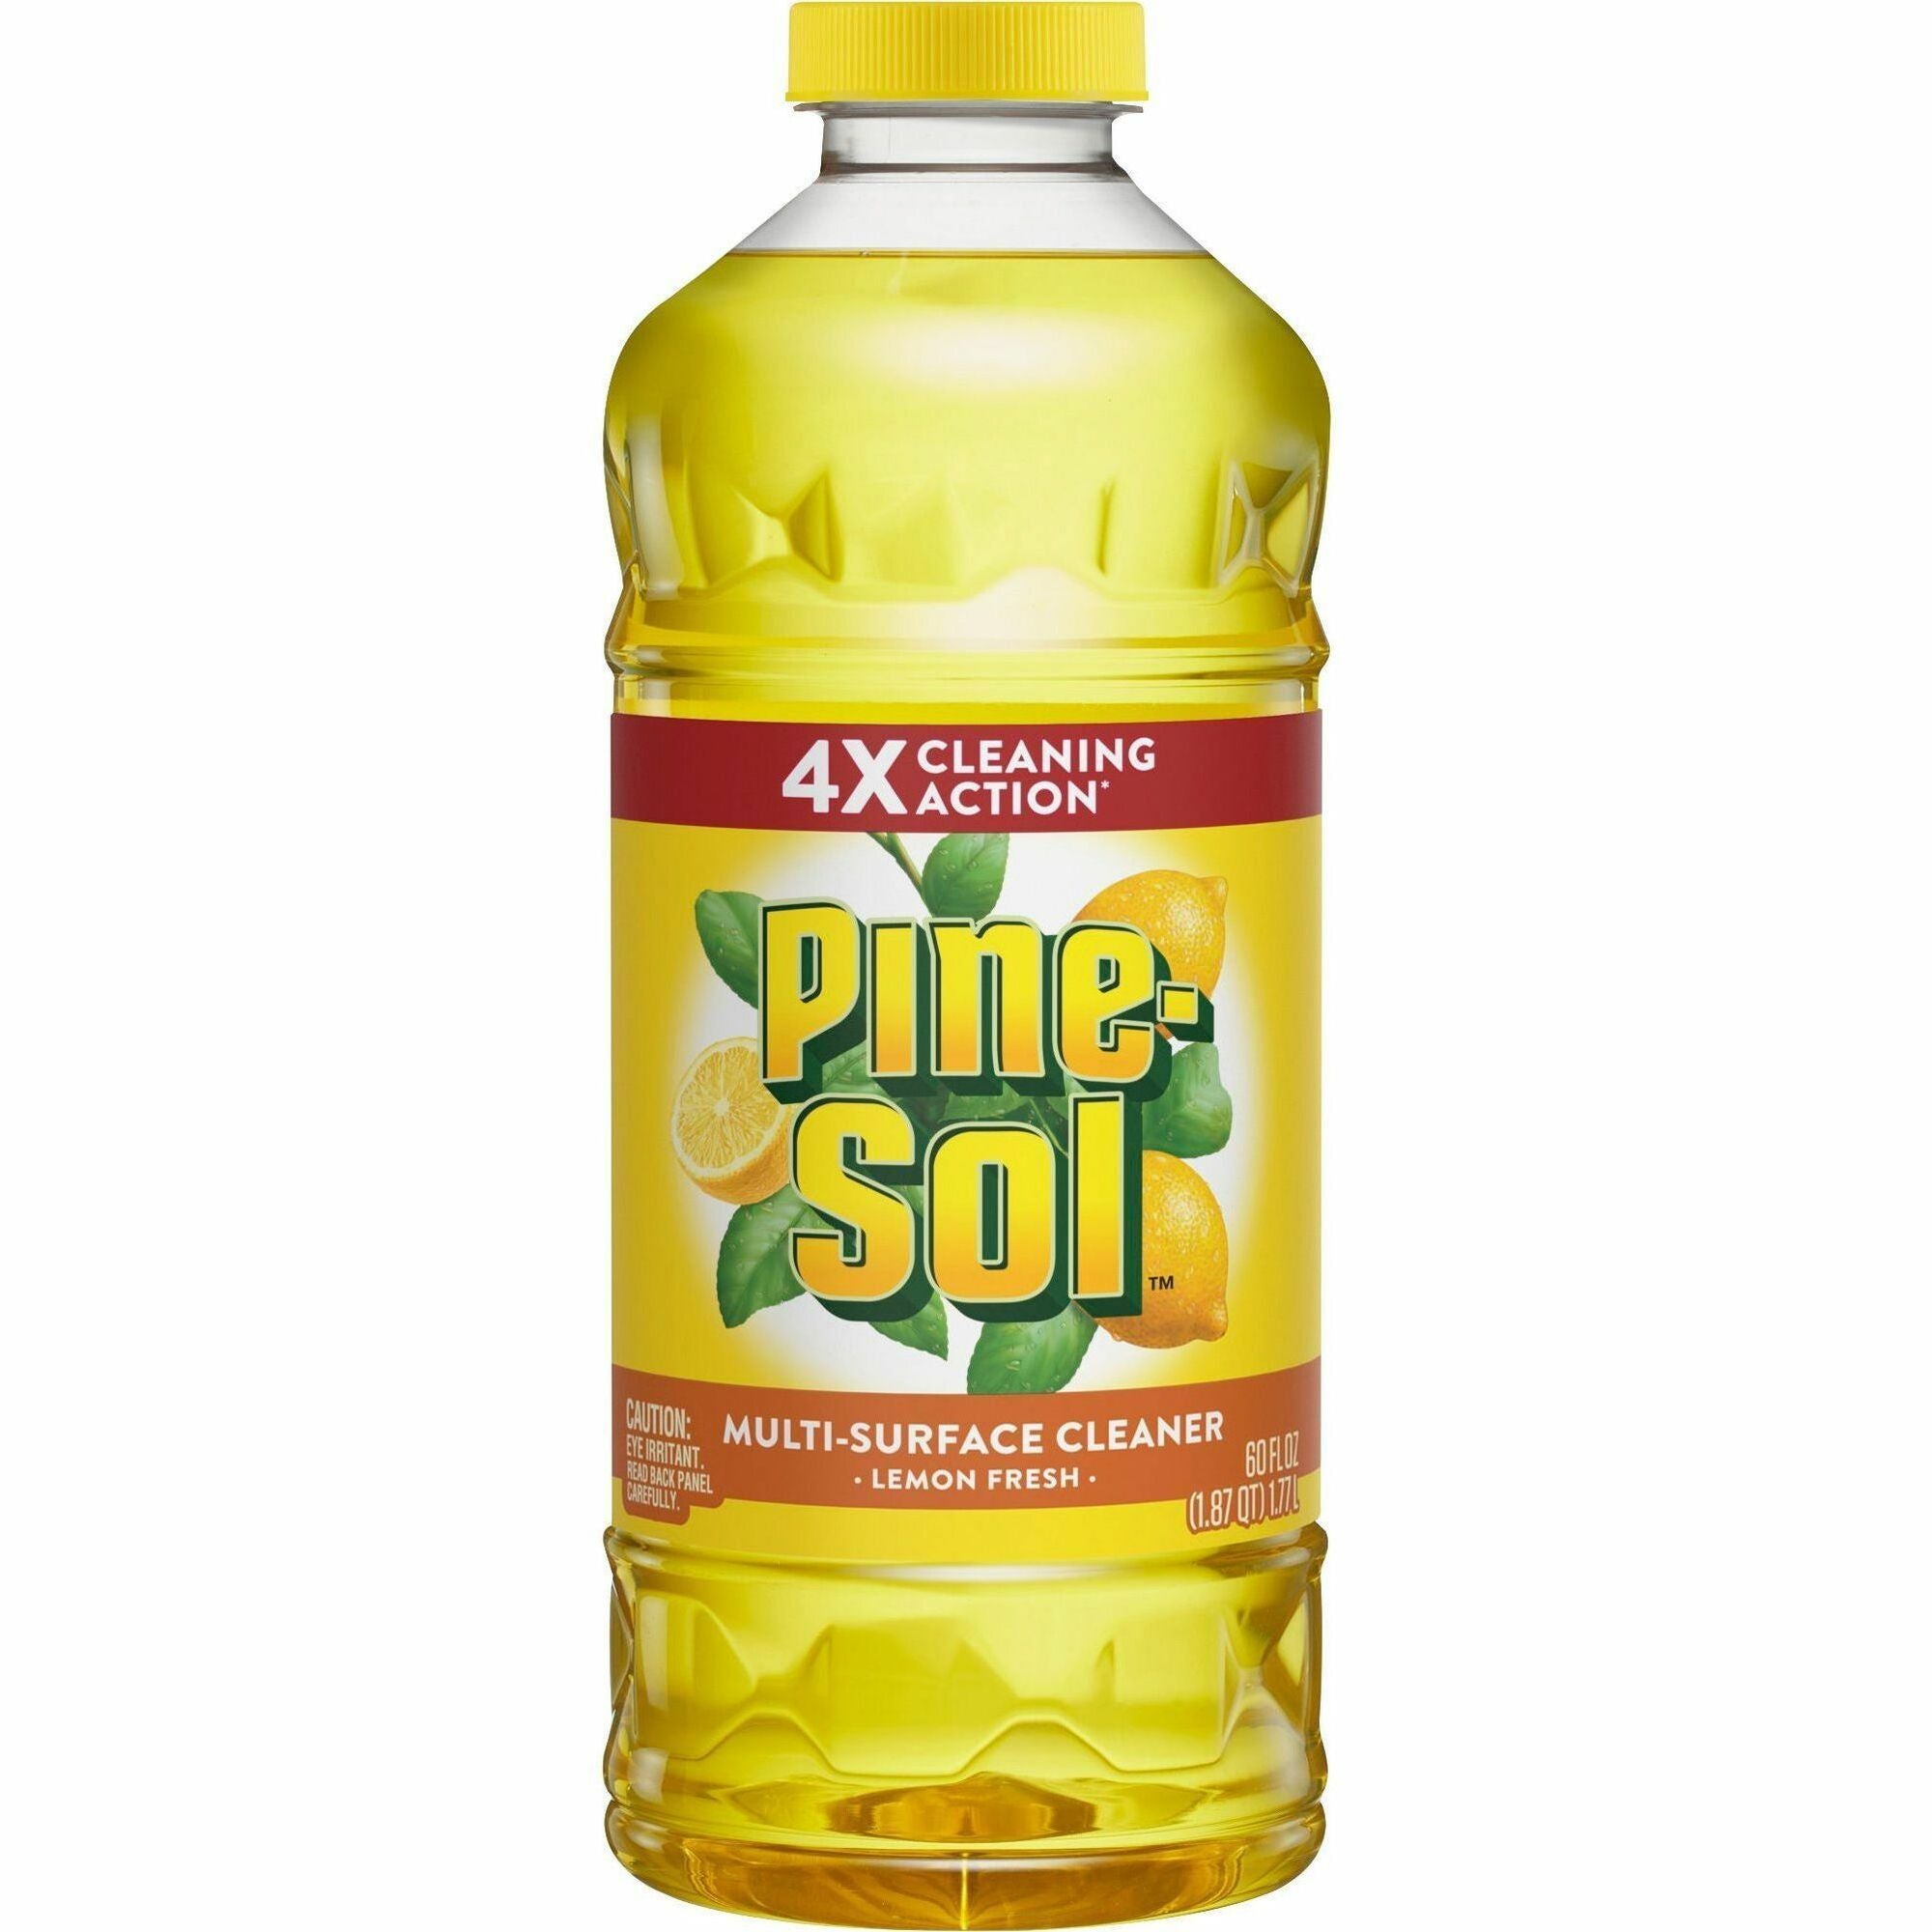 Pine-Sol All Purpose Cleaner - For Multipurpose - Concentrate - 60 fl oz (1.9 quart) - Lemon Fresh Scent - 1 Each - Deodorize, Disinfectant, Residue-free - Yellow - 